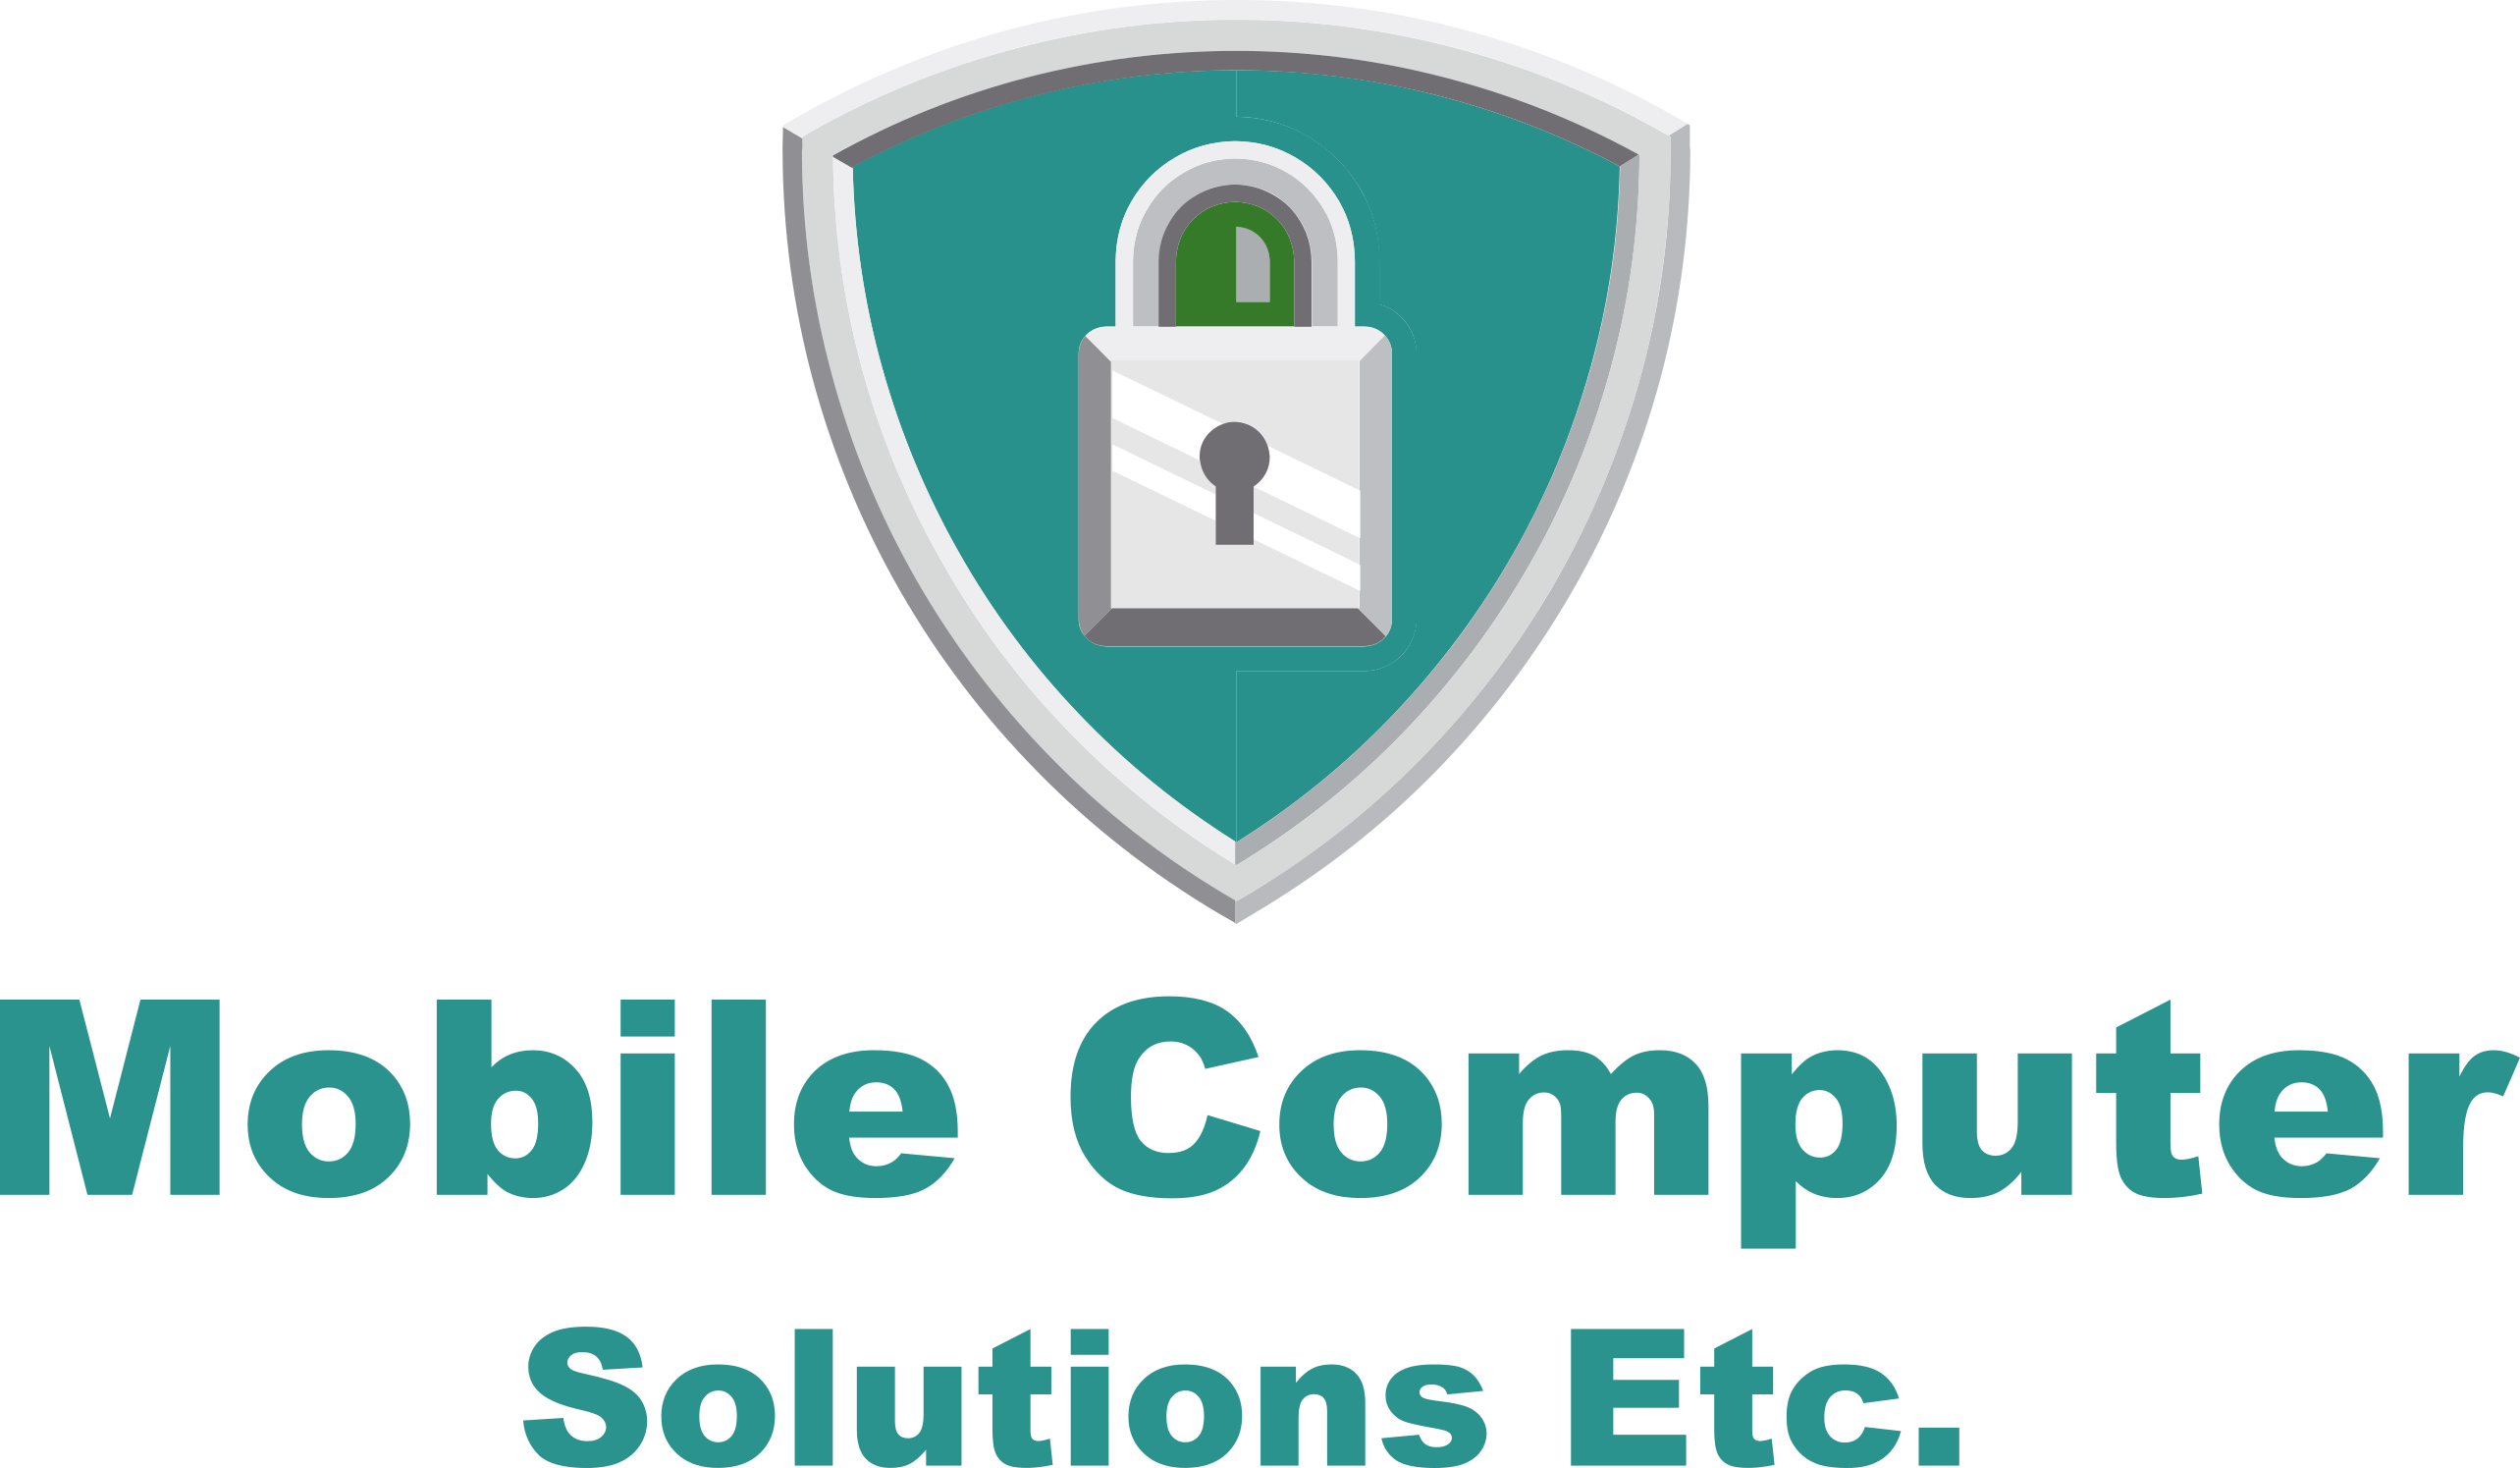 Mobile Computer Solutions Etc.